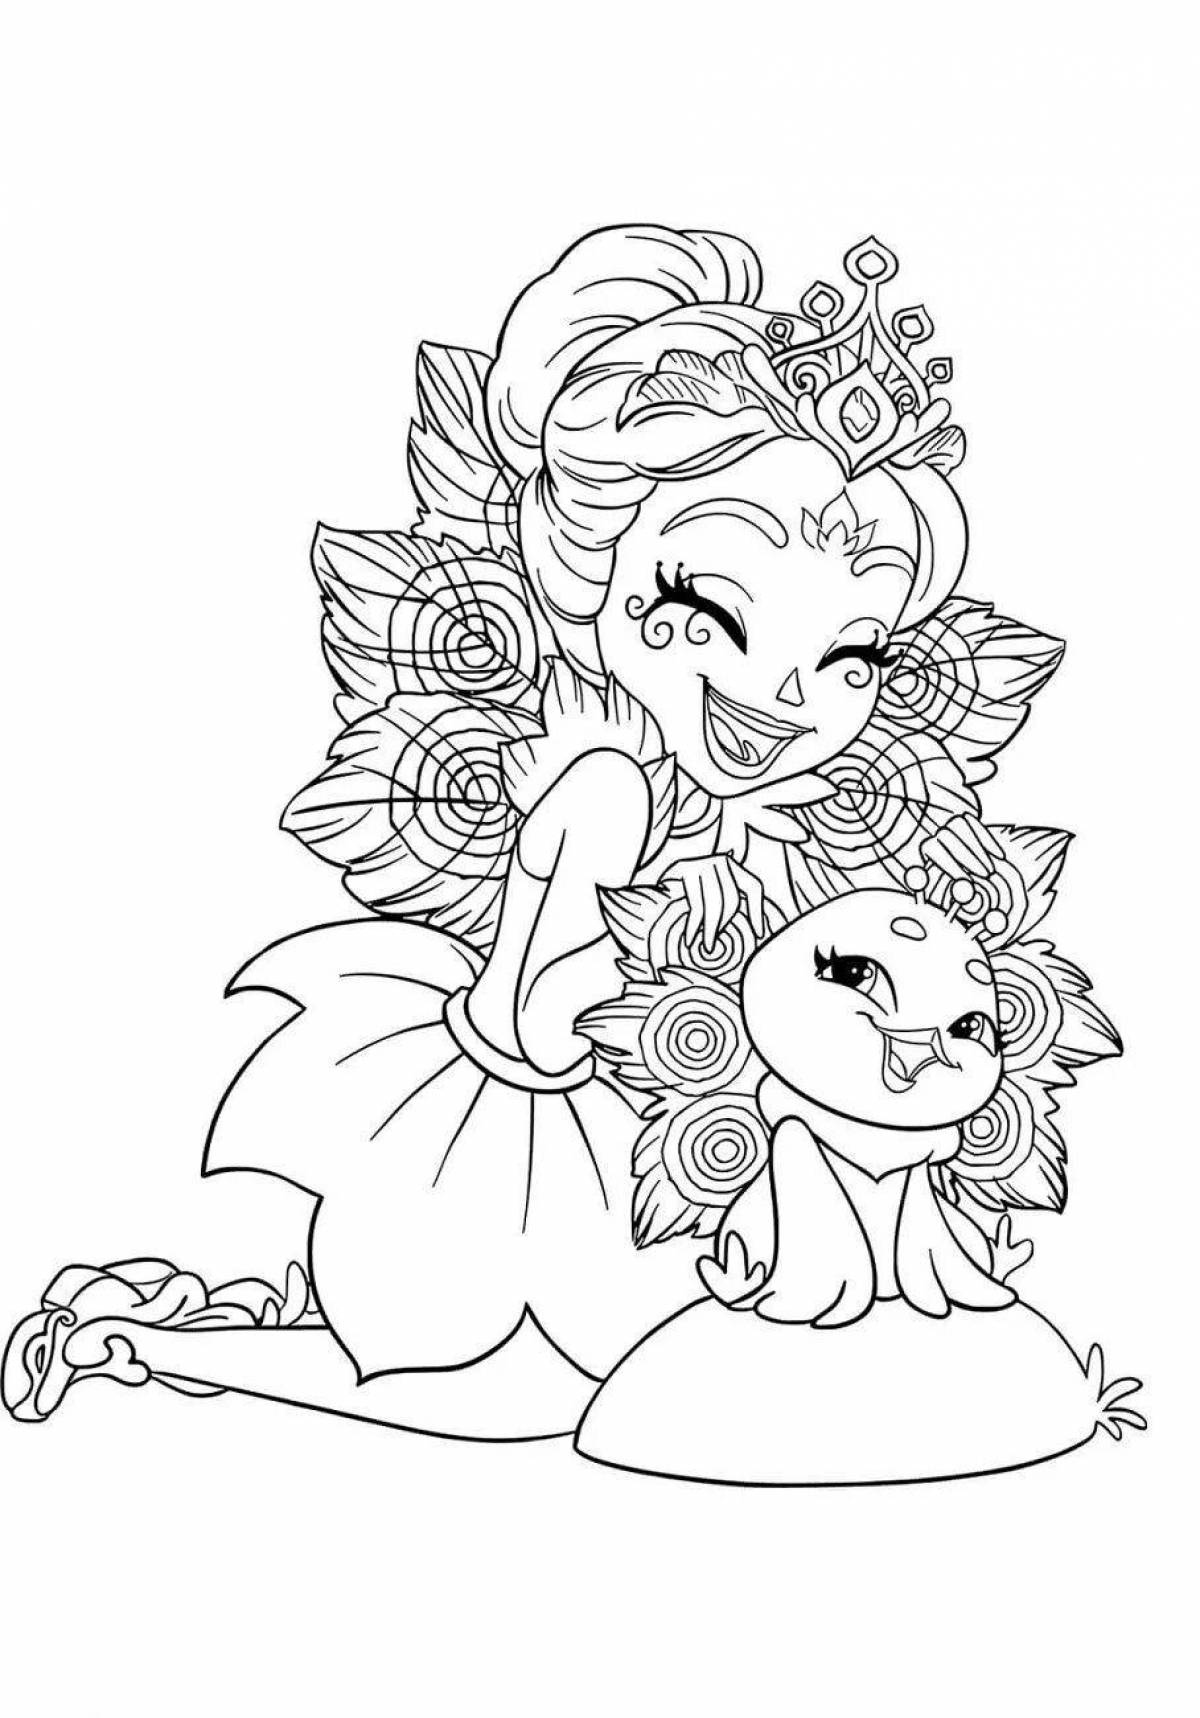 Radiant incantimuls coloring page